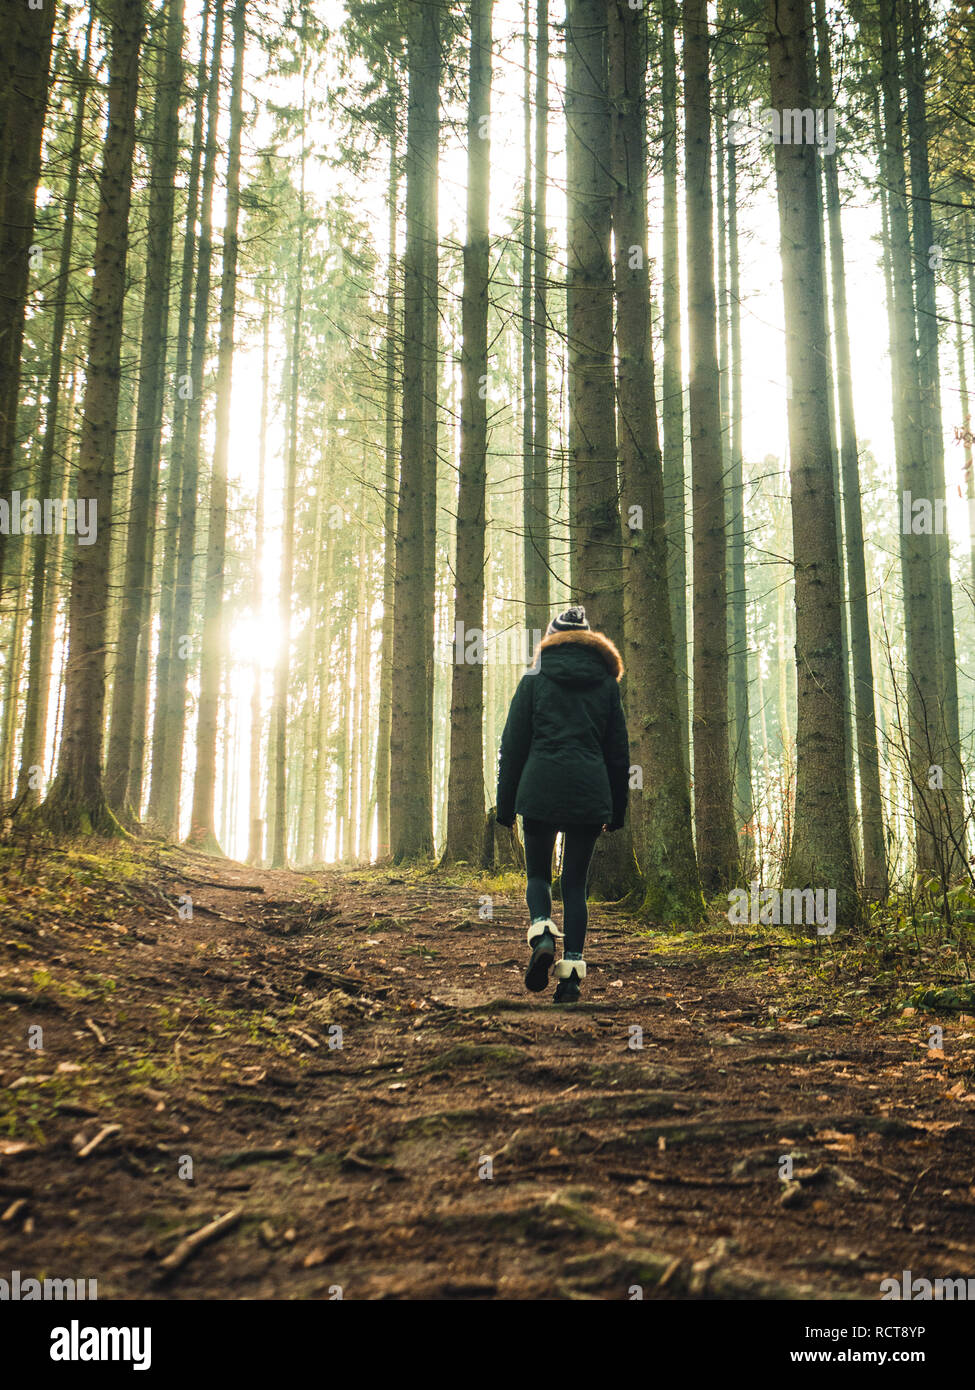 morning glory: young woman walking on a peaceful hiking path in the woods Stock Photo